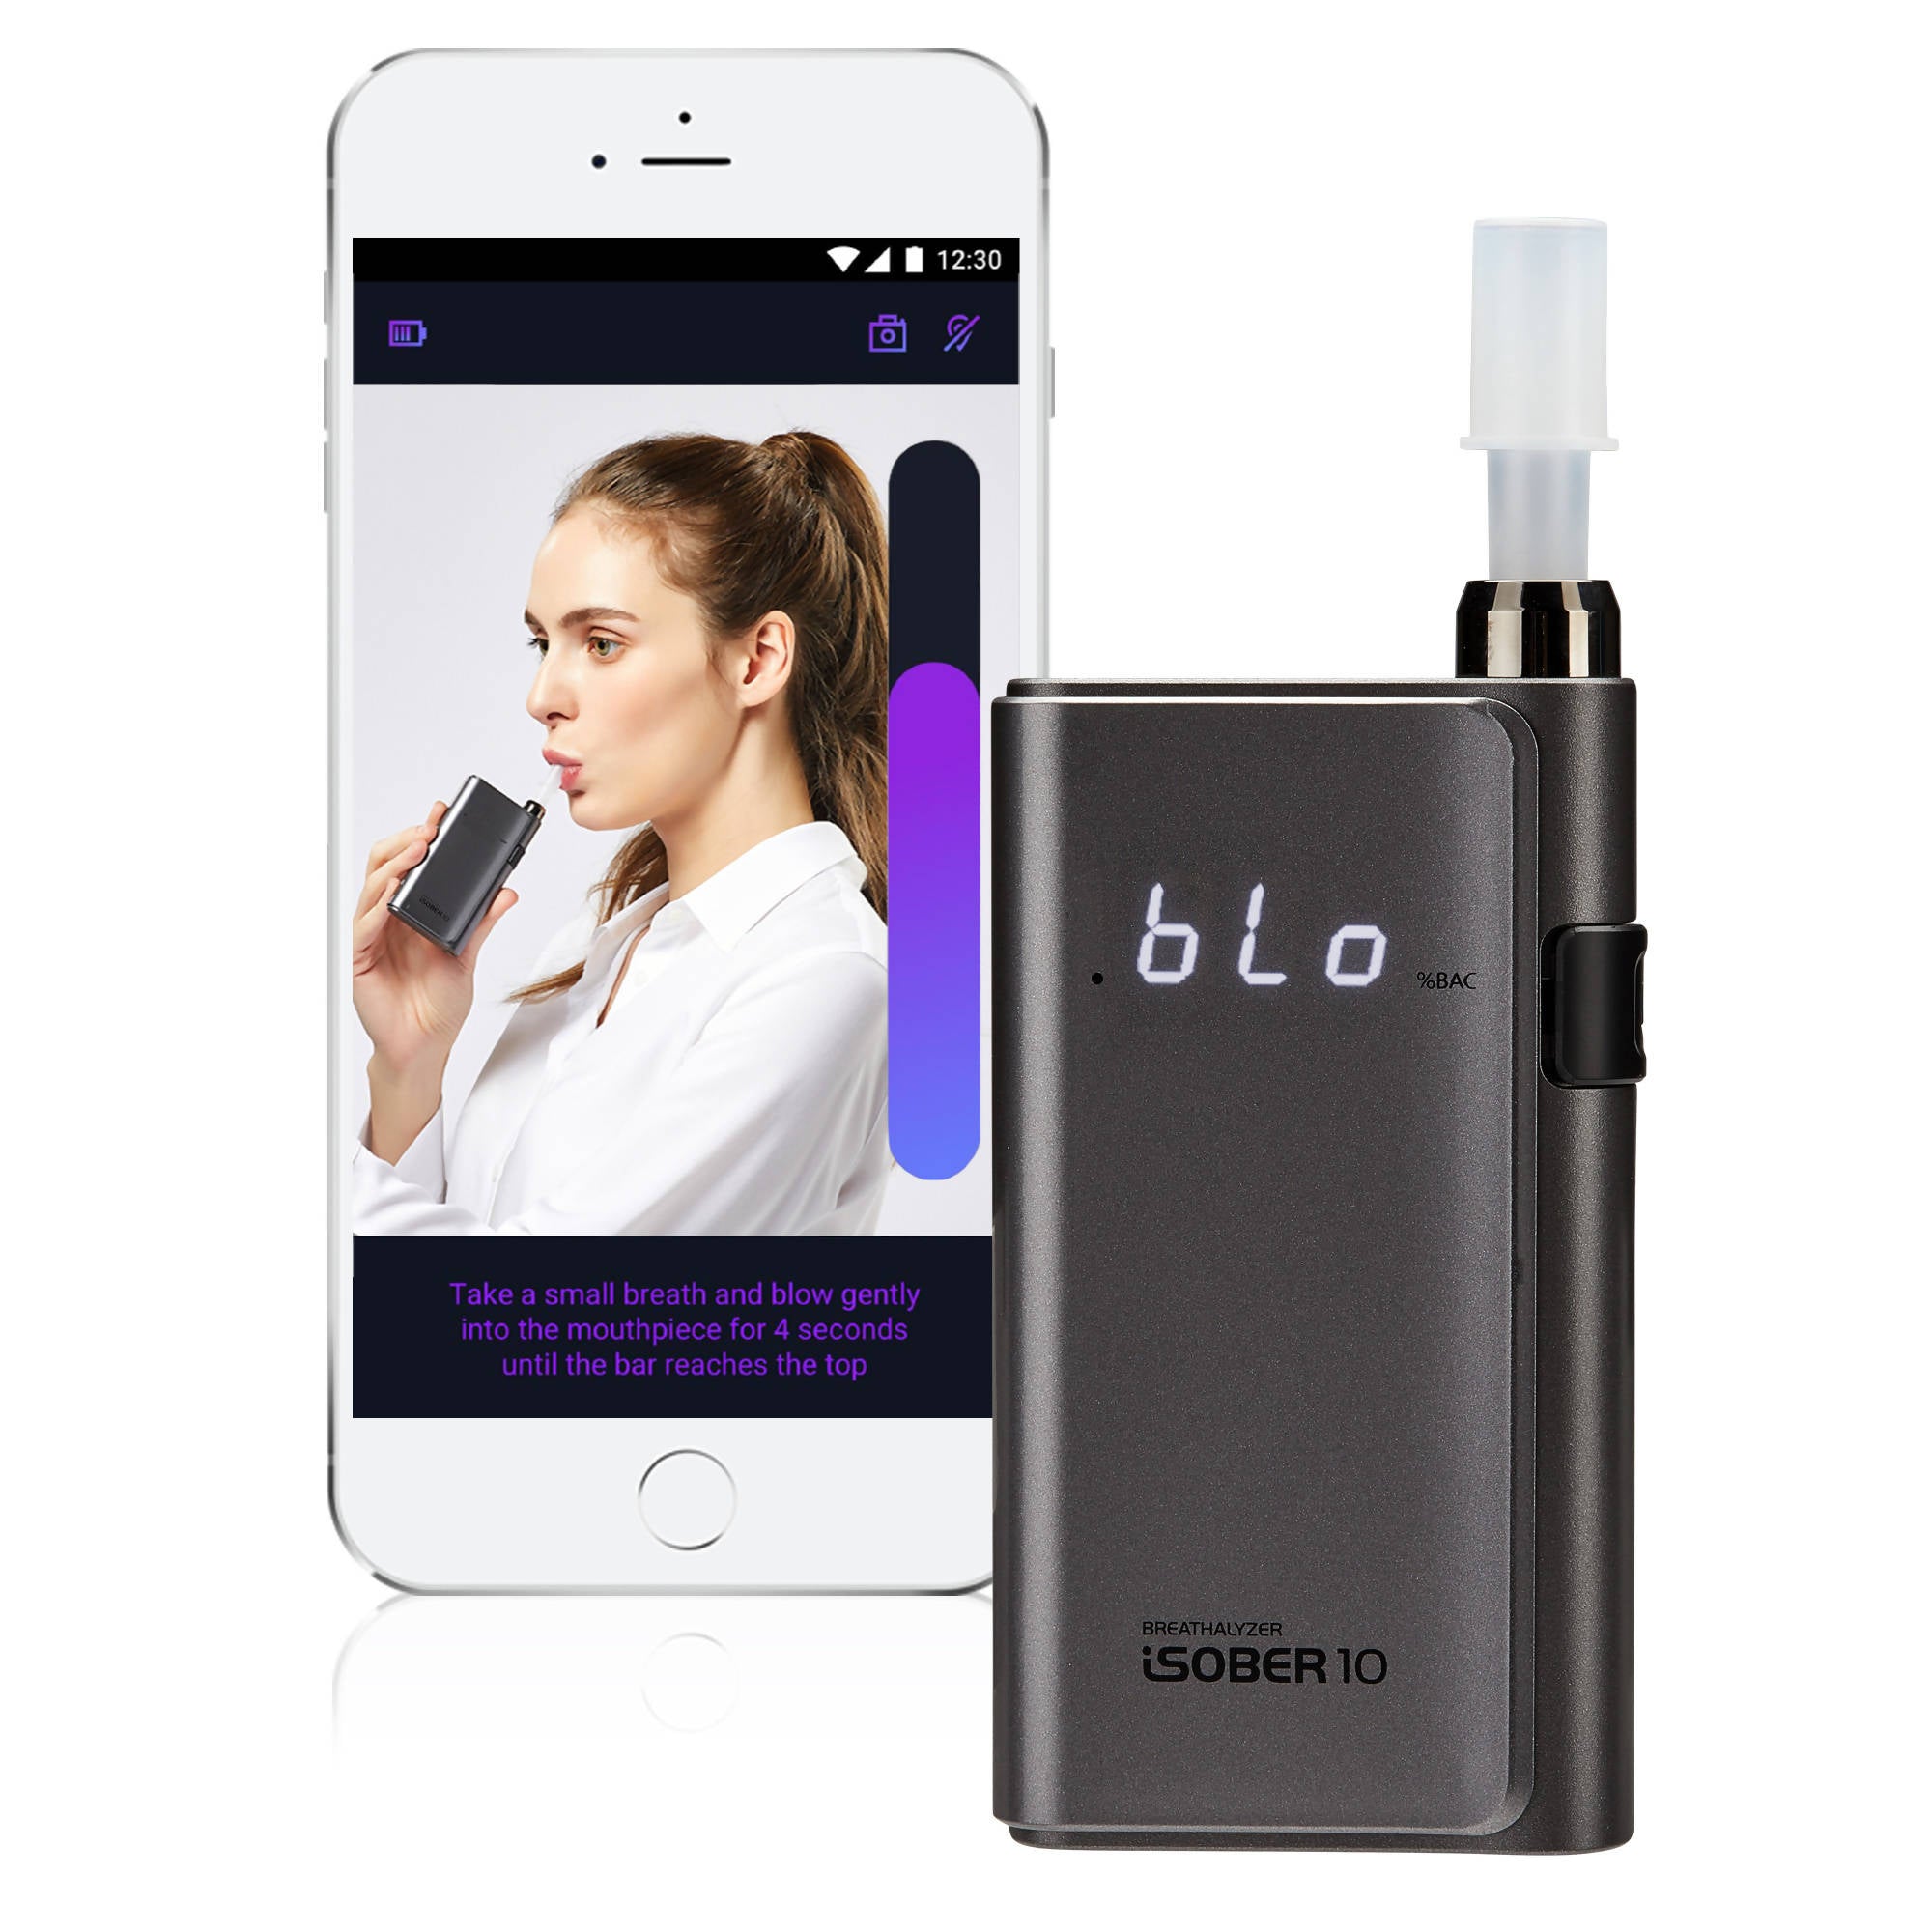 [iSOBER] Personal Breath Alcohol Tester iSOBER 10